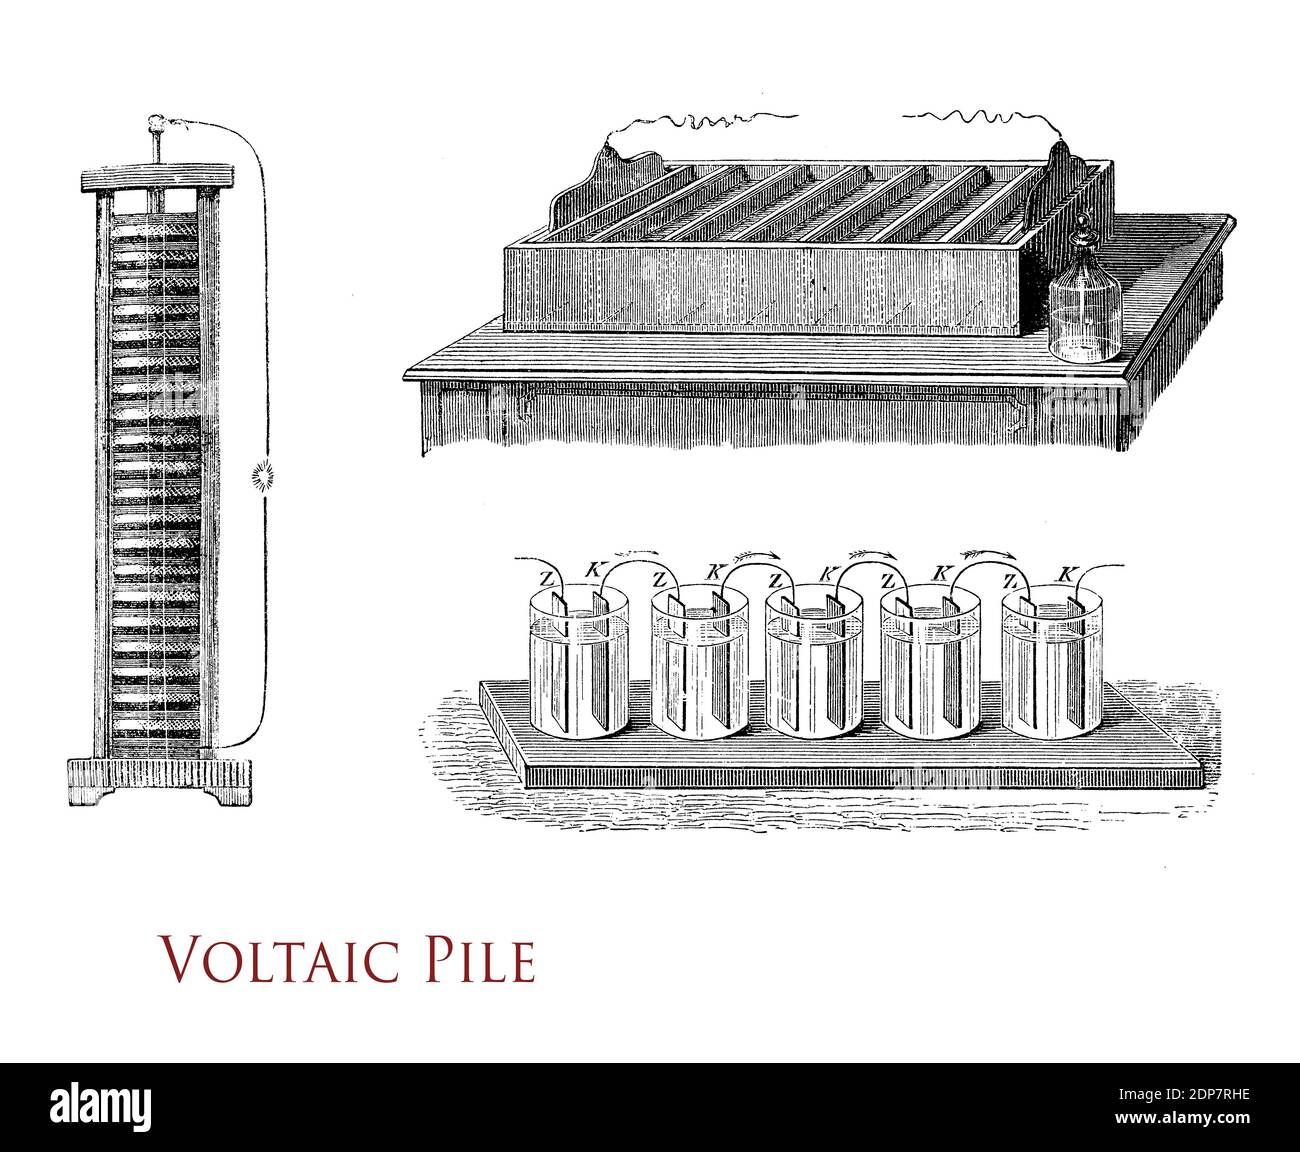 Voltaic pile: the first electrical battery to provide continuous electric current to a circuit, invented by Alessandro Volta, vintage illustration Stock Photo